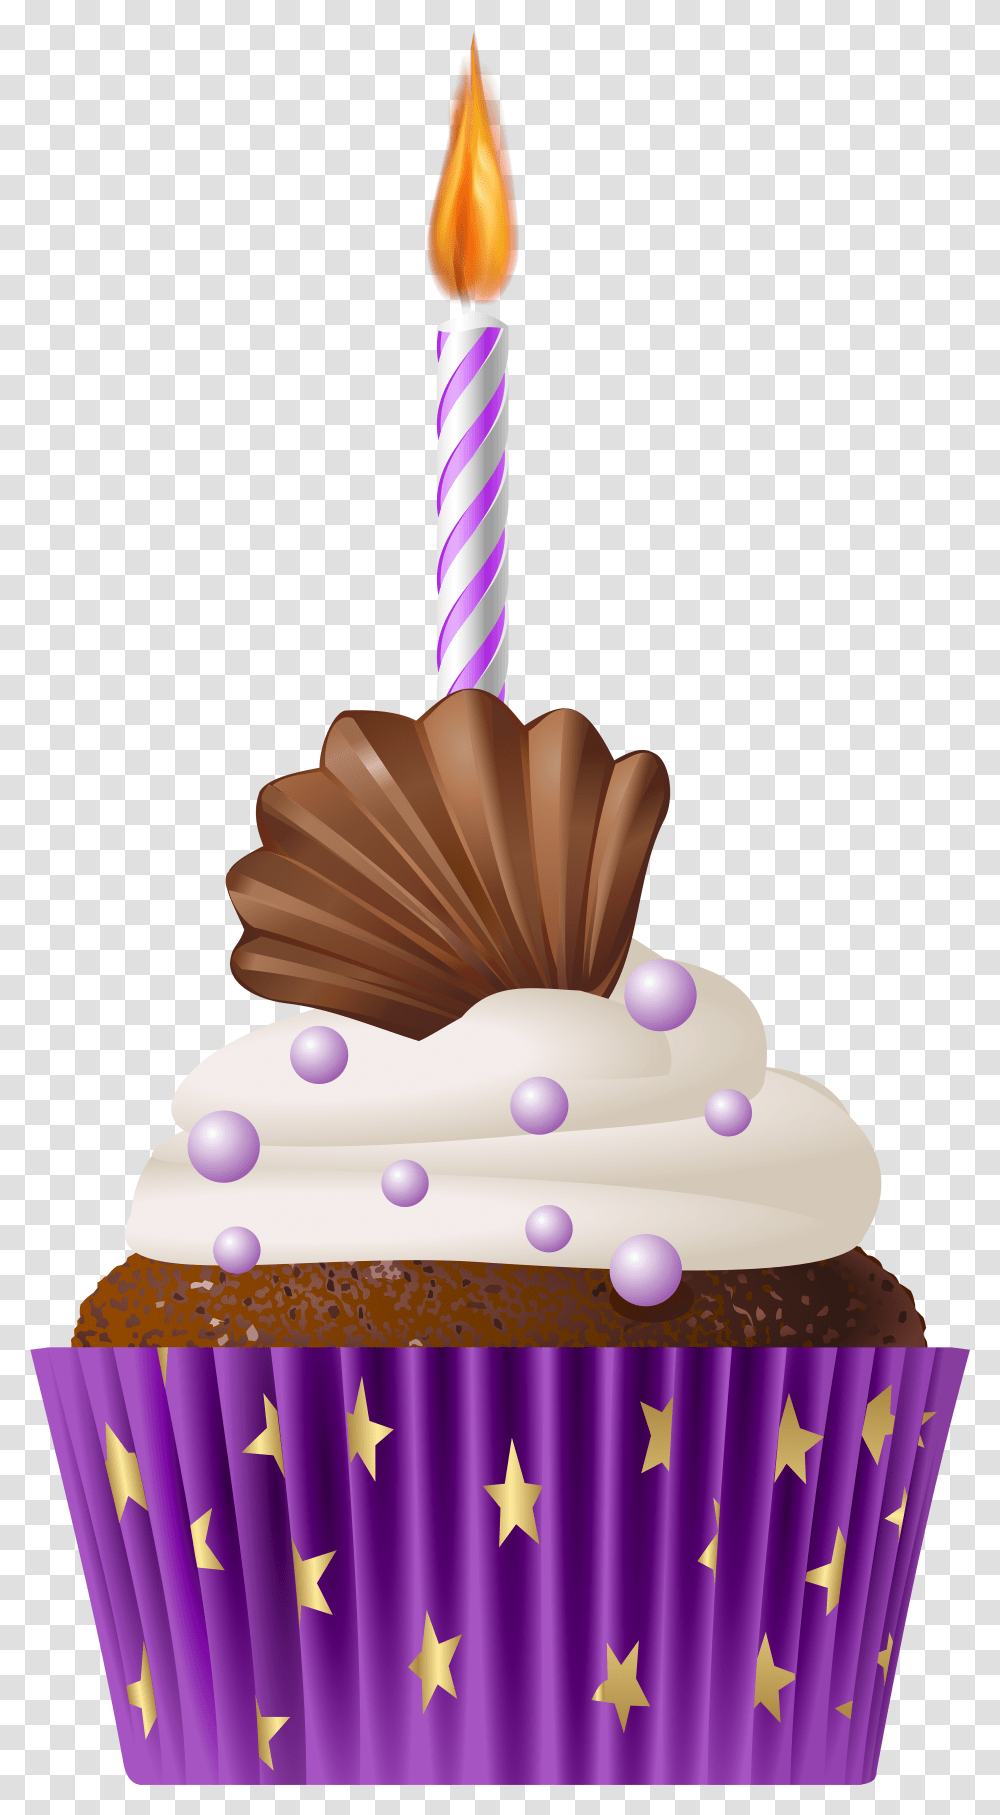 Cupcakes Clipart Candle Purple Birthday Cake Transparent Png